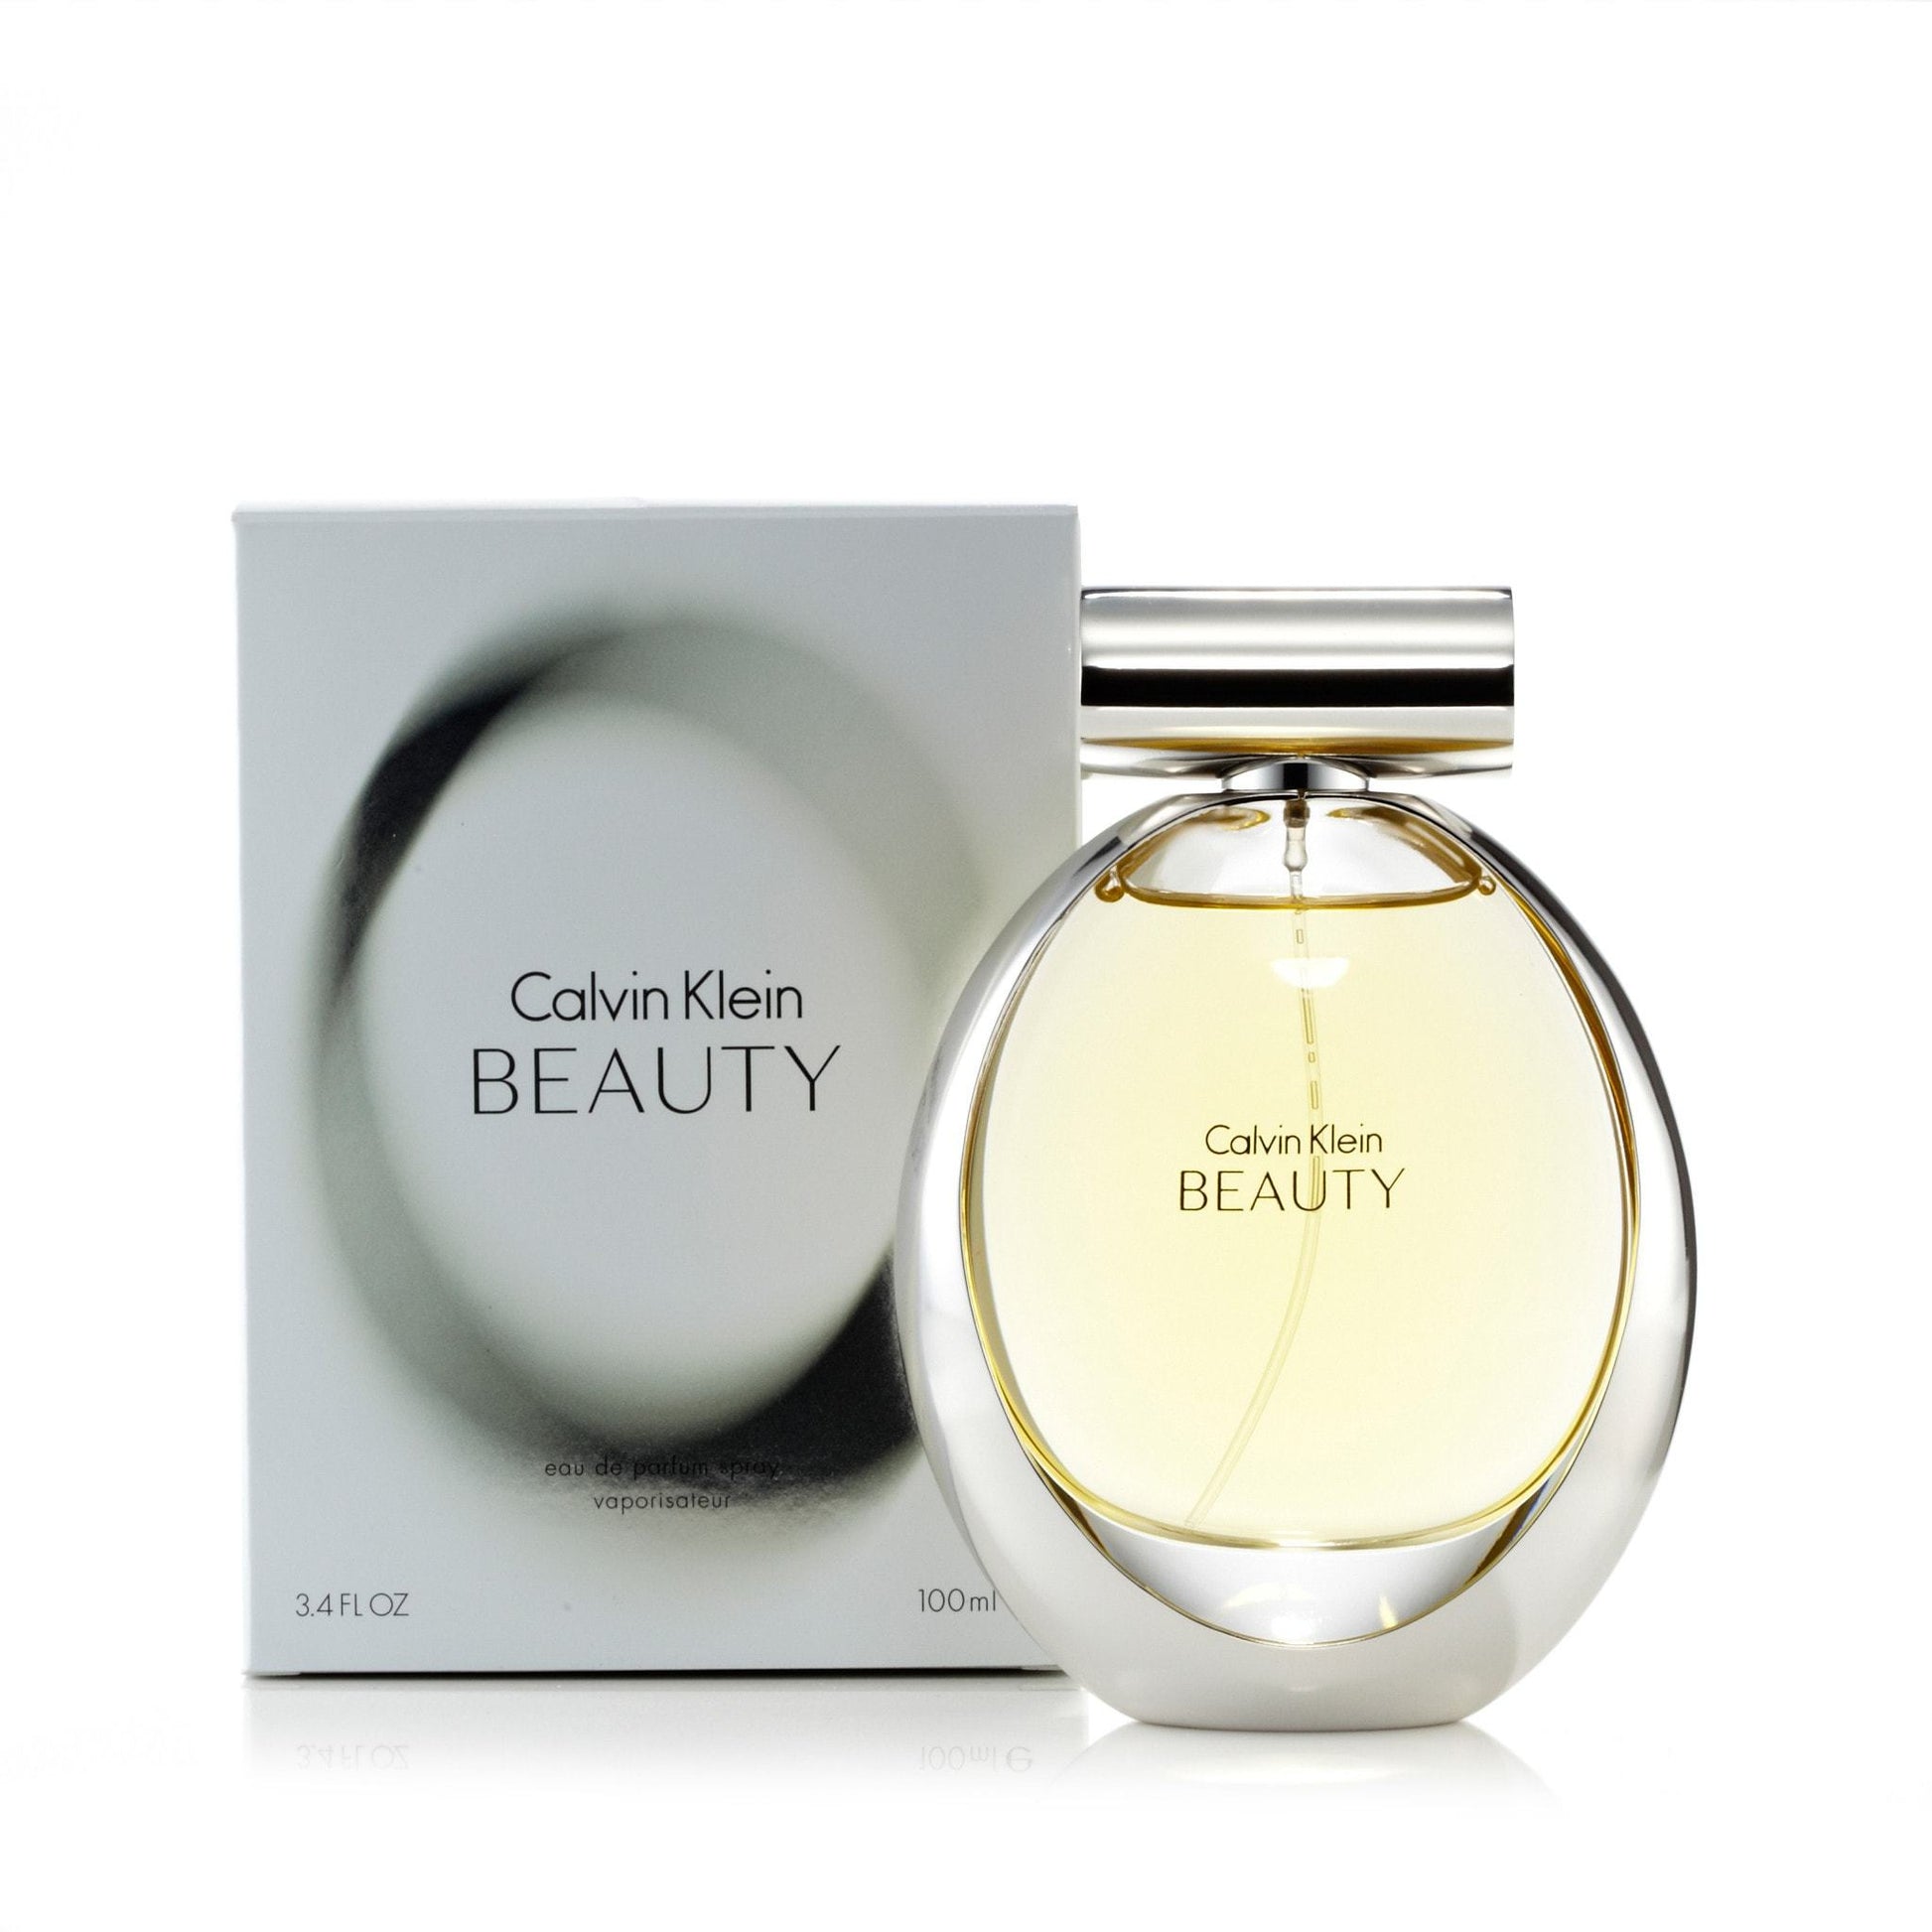 Beauty EDP for Women by Calvin Klein, Product image 1